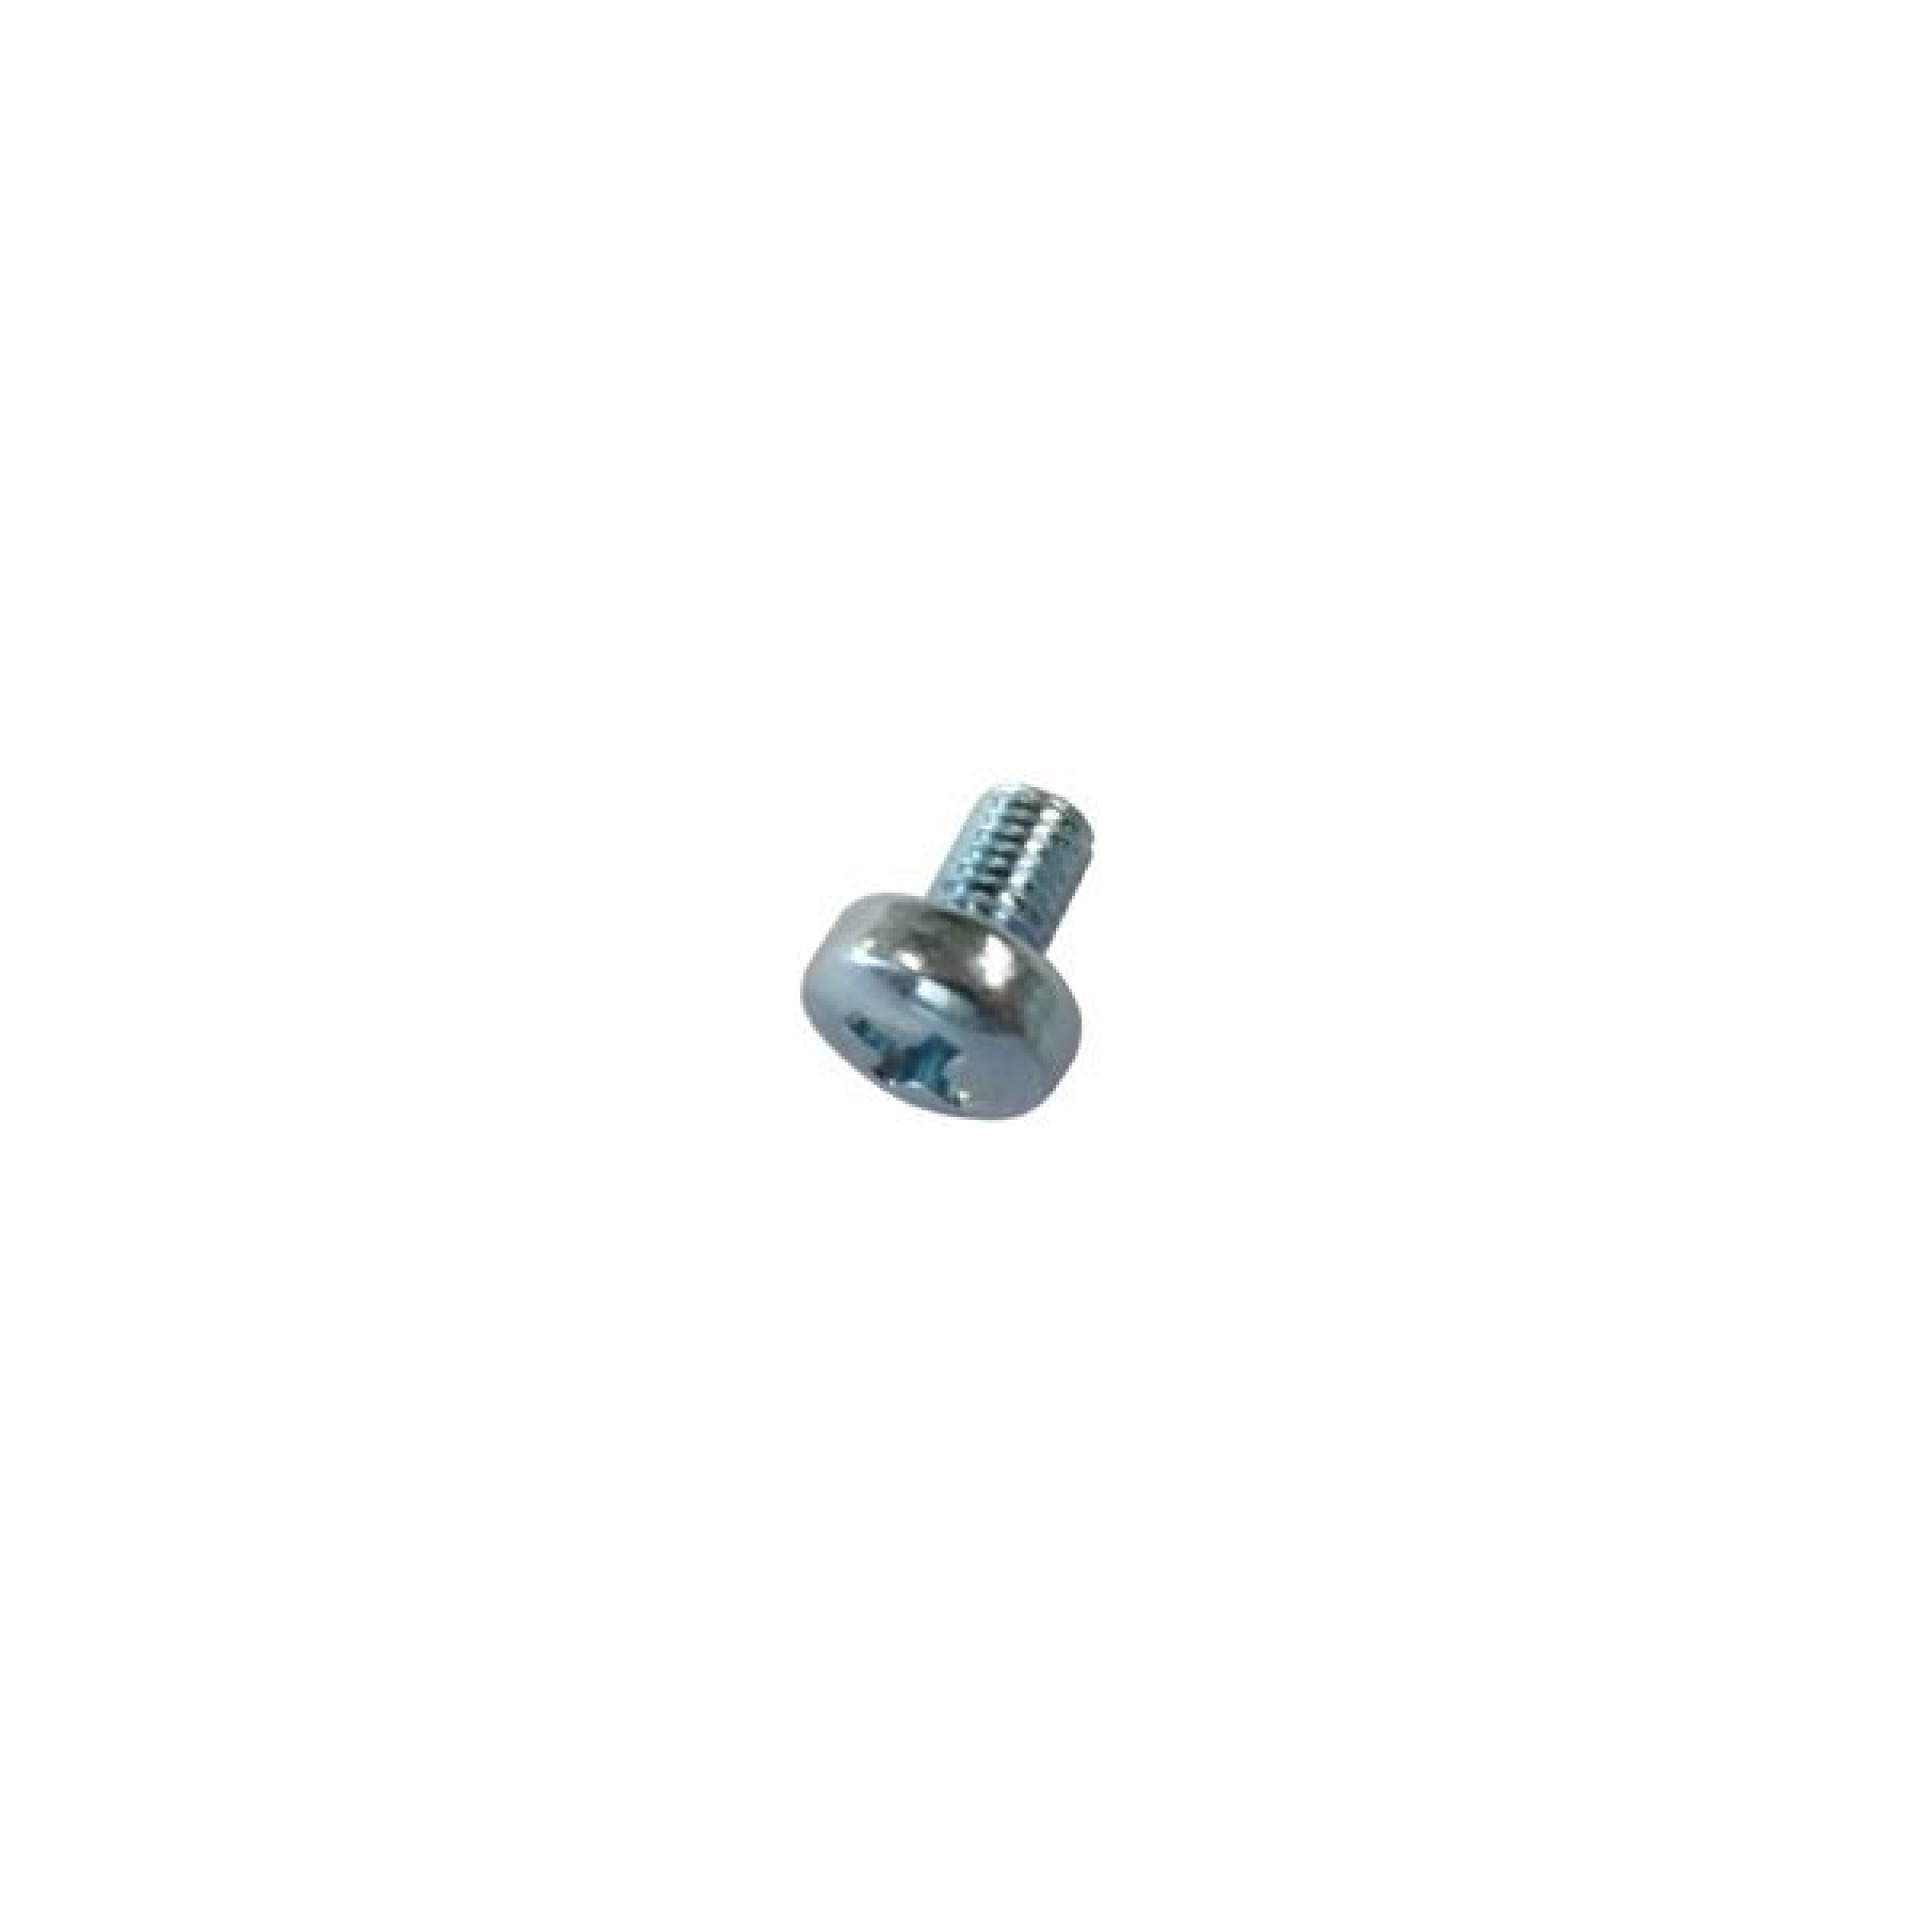 Screw M5 x 8mm for 83030.1